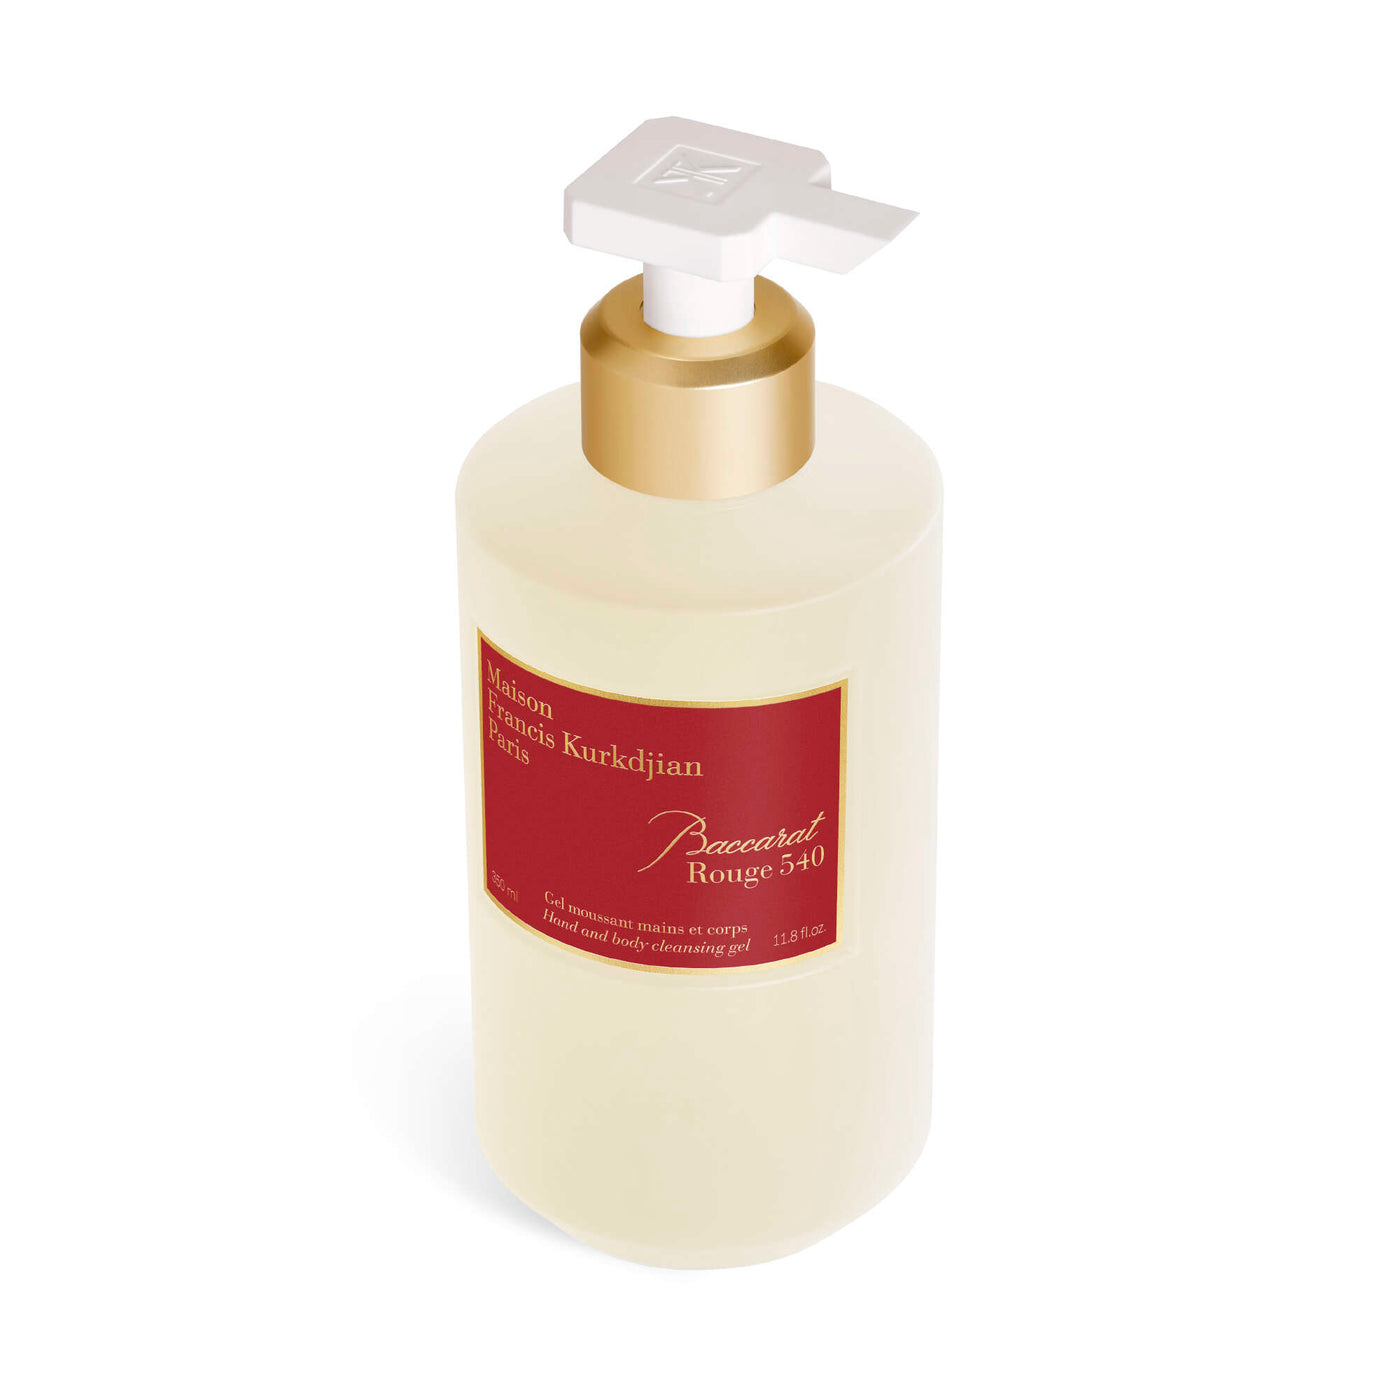 Baccarat Rouge 540 - Hand and Body Cleansing Gel